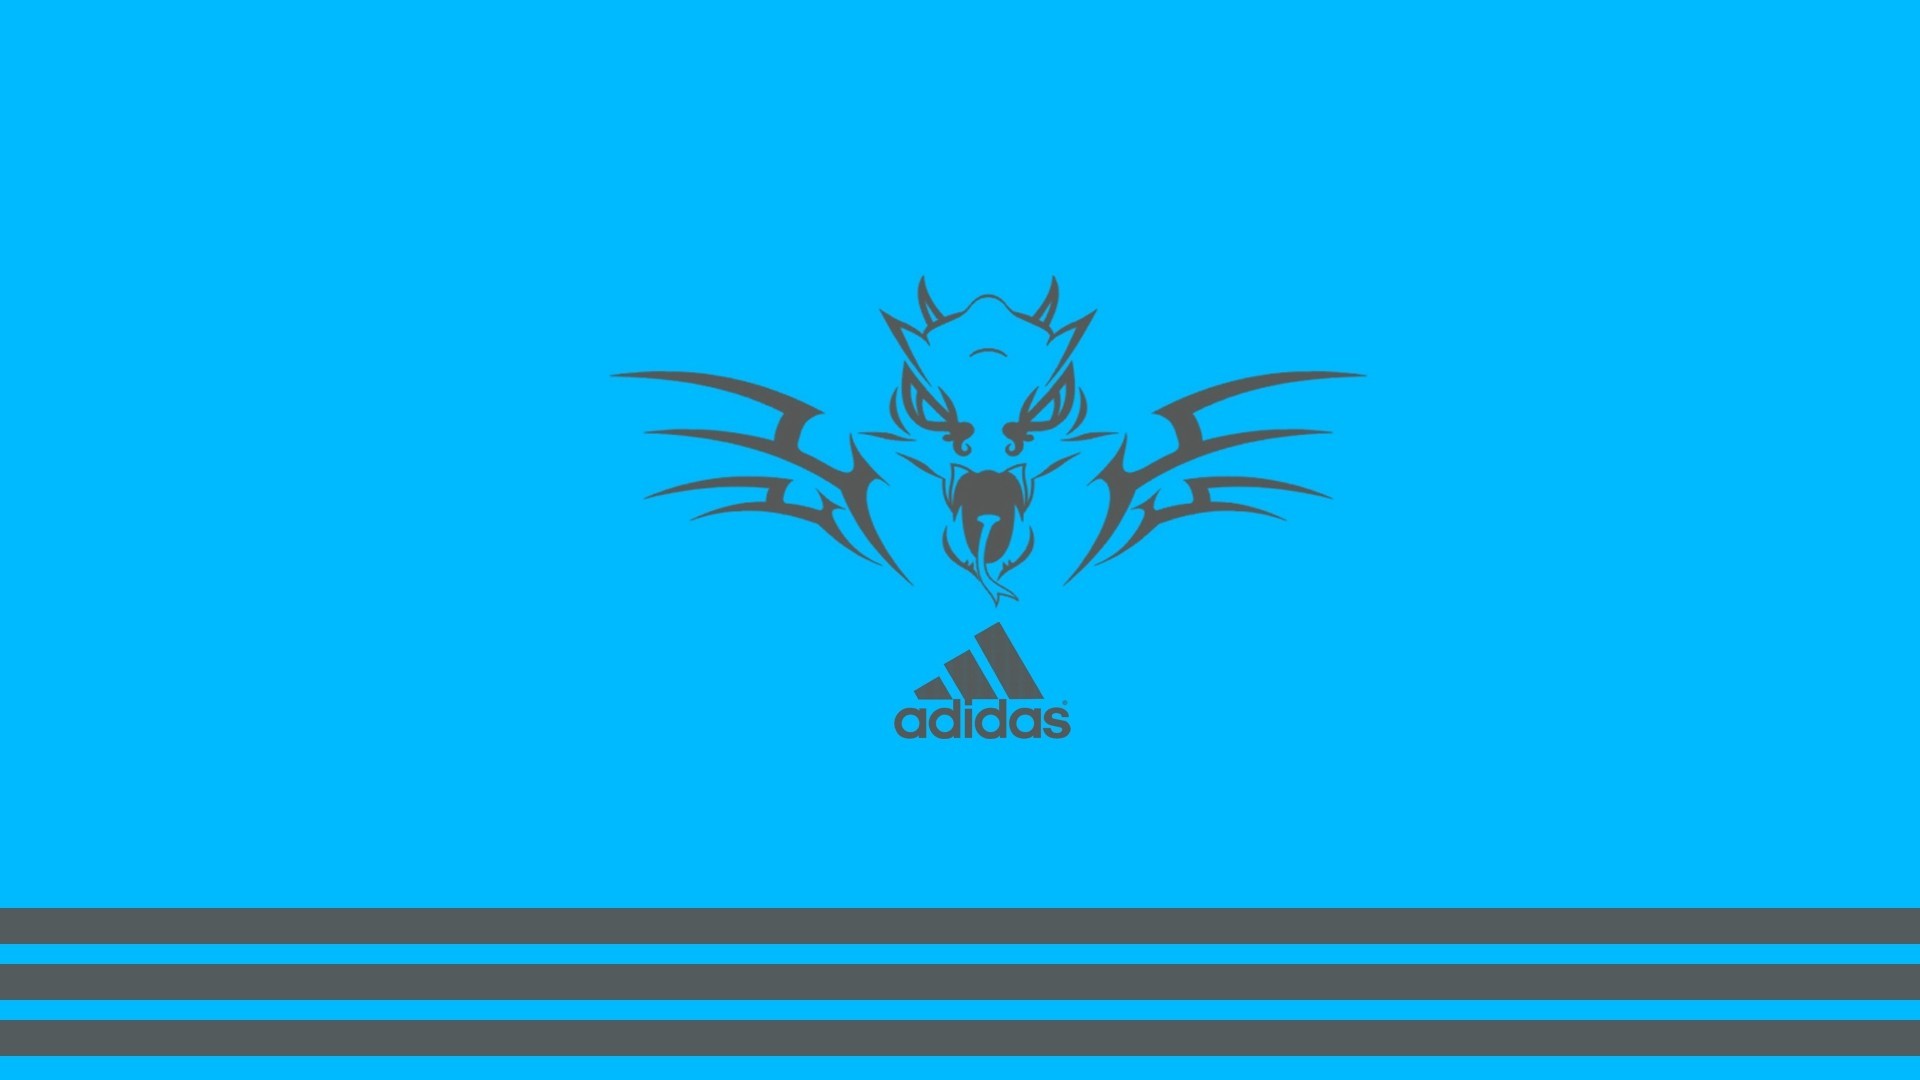 Adidas Logo Wallpaper HD with high-resolution 1920x1080 pixel. You can use this wallpaper for your Desktop Computer Backgrounds, Mac Wallpapers, Android Lock screen or iPhone Screensavers and another smartphone device